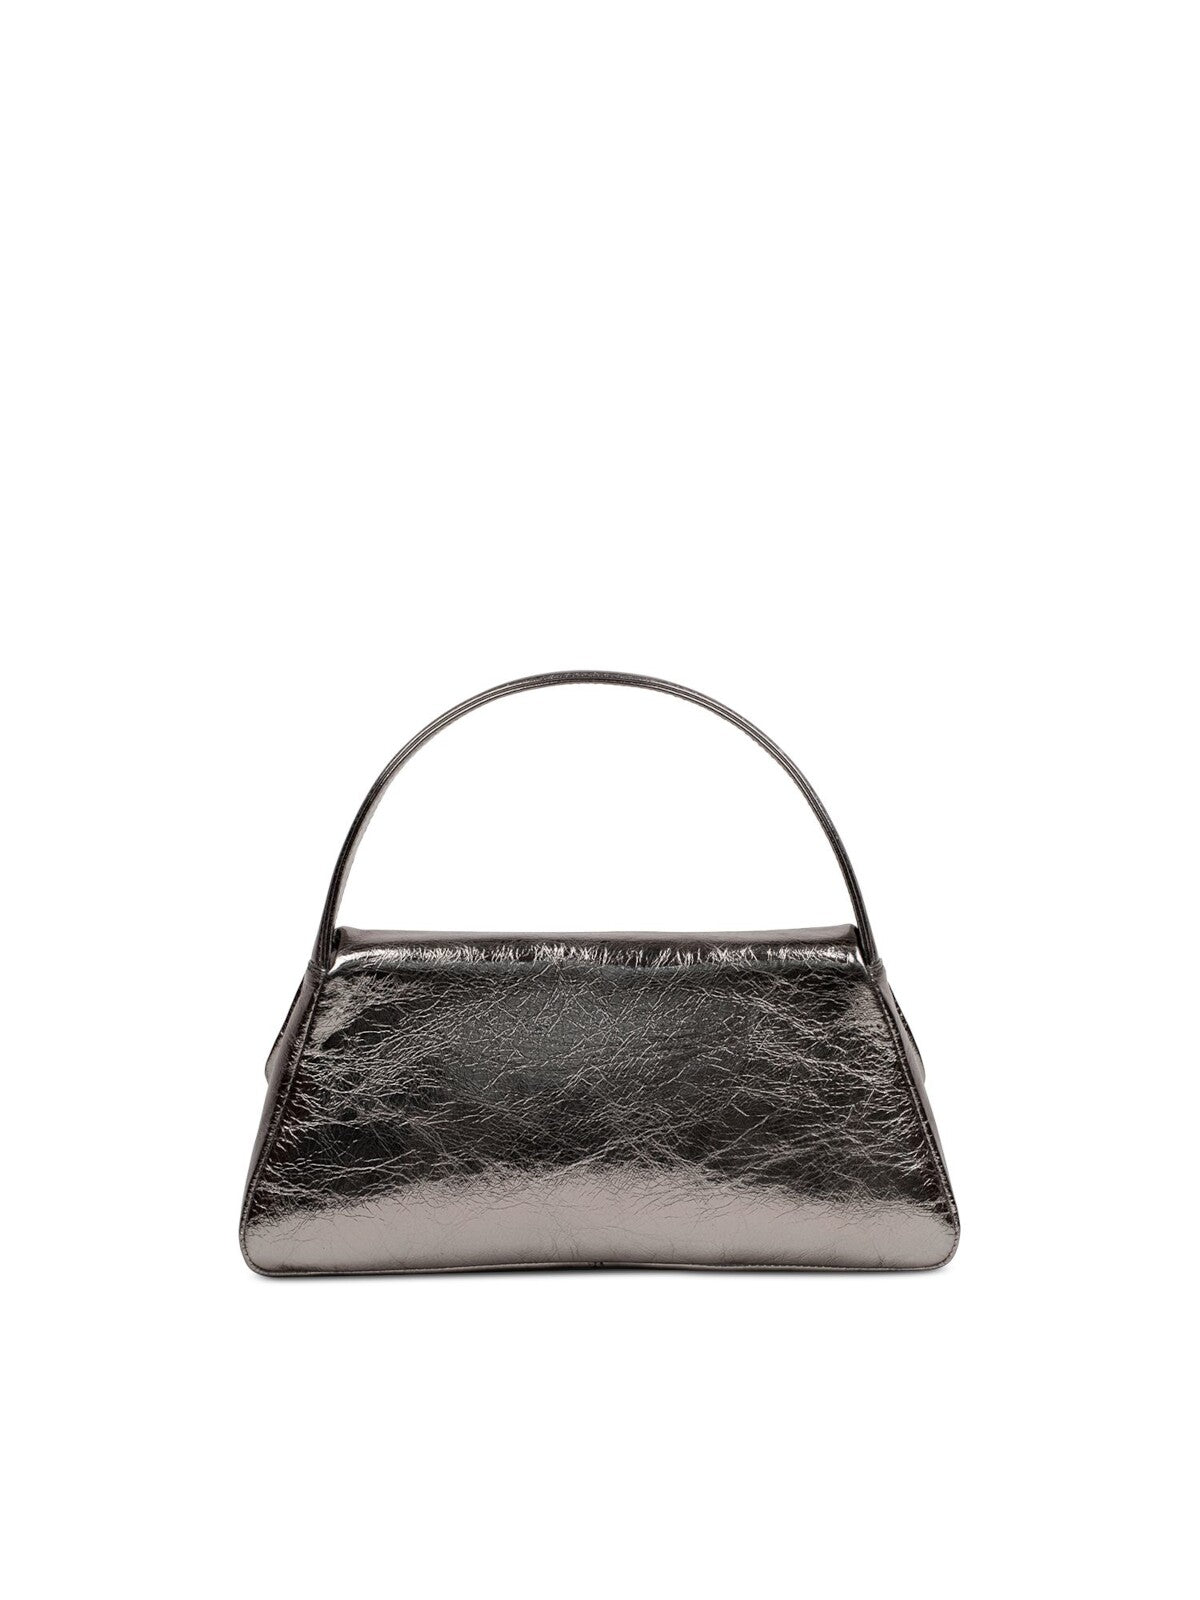 LISELLE KISS Women's Silver Metallic Solid Leather Puffed Design Single Strap Shoulder Bag